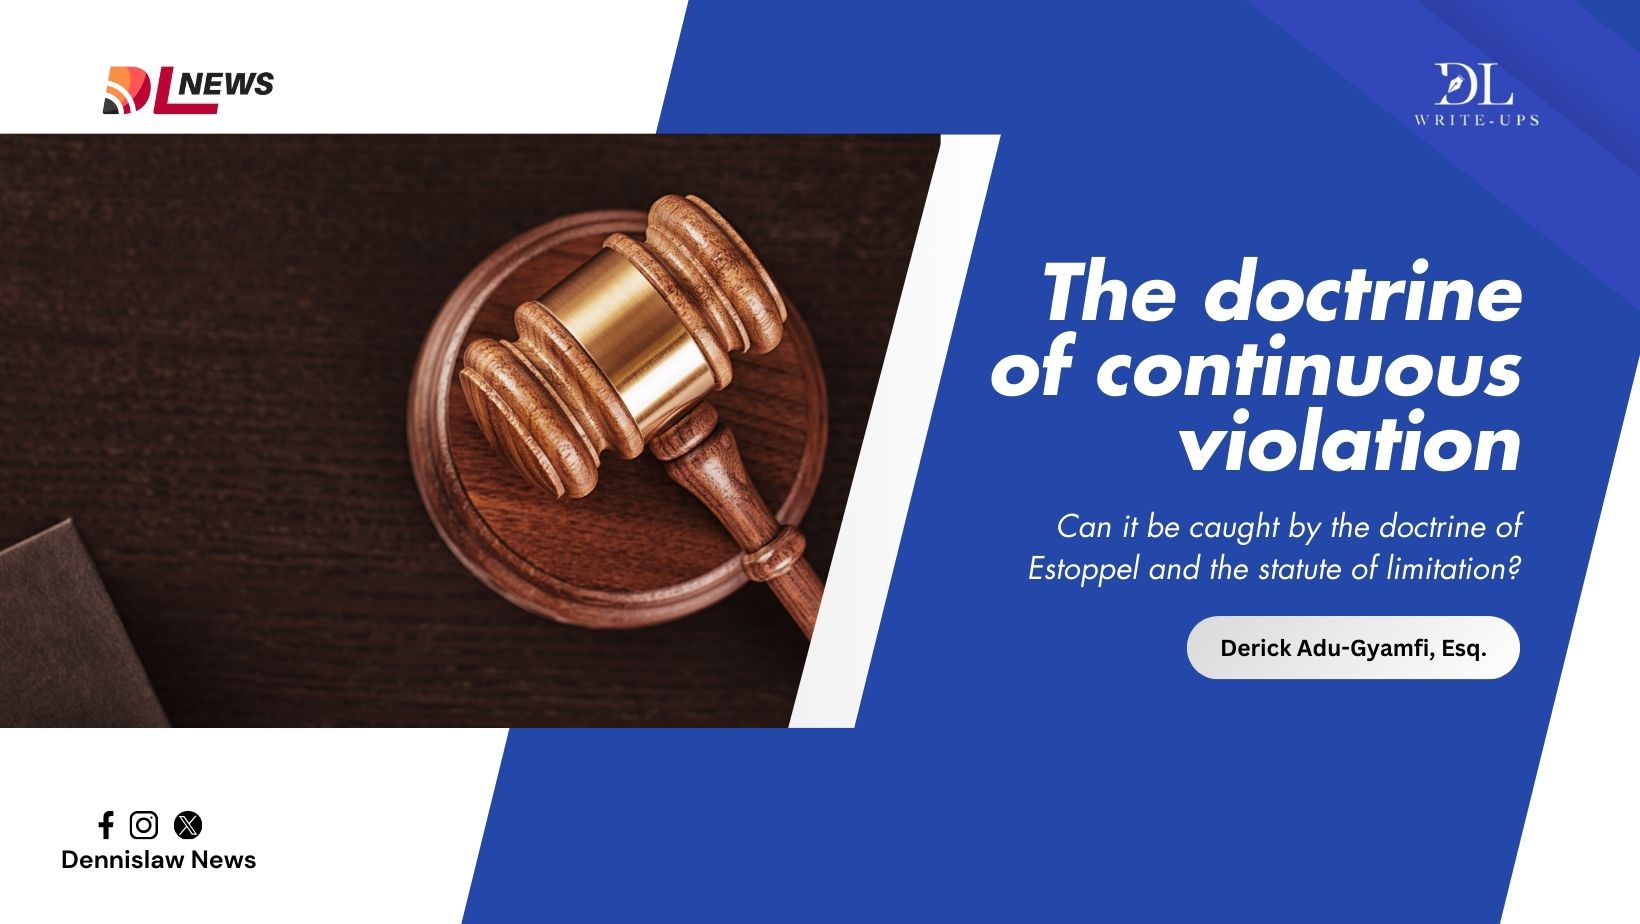 The doctrine of continuous violation: Can it be caught by the doctrine of Estoppel and the statute of limitation?